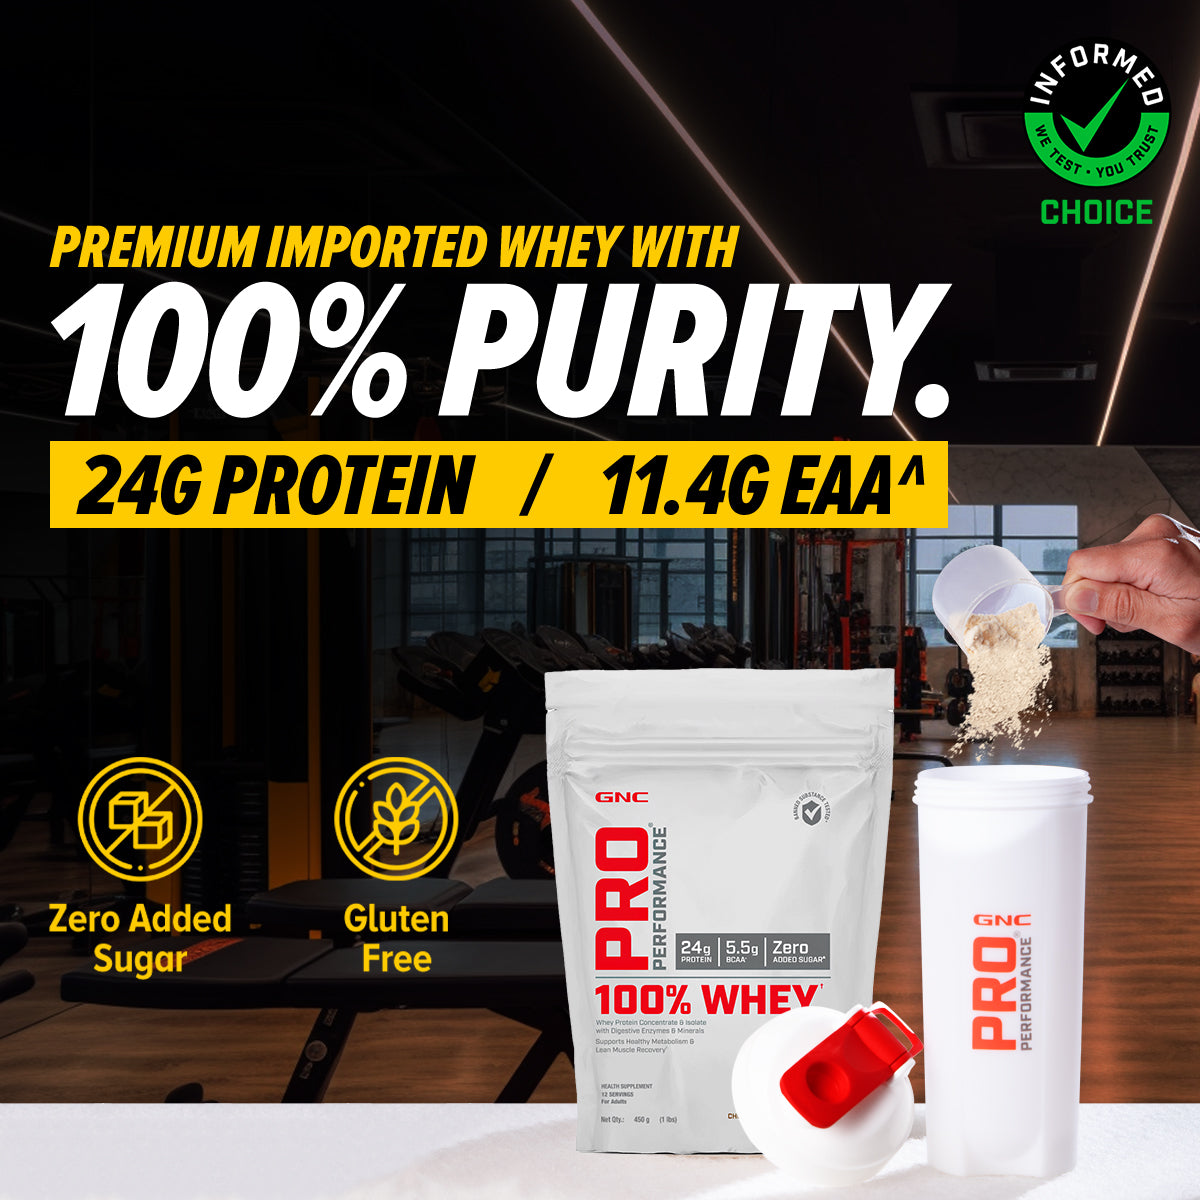 GNC Pro Performance 100% Whey Protein- Clearance Sale - Faster Recovery & Lean Muscle Gains | Informed Choice Certified